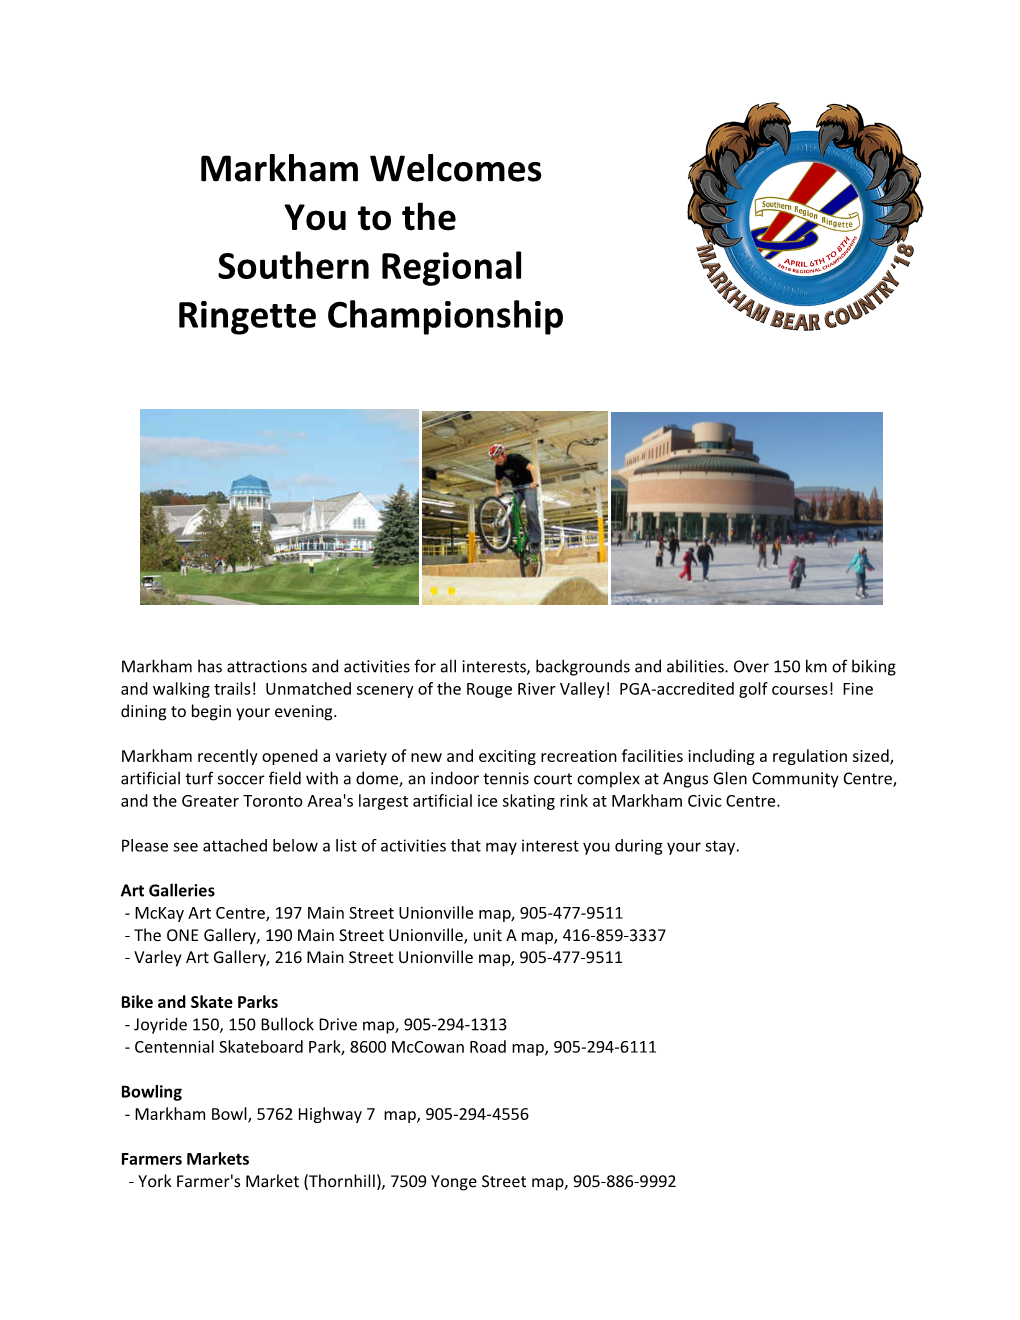 Markham Welcomes You to the Southern Regional Ringette Championship